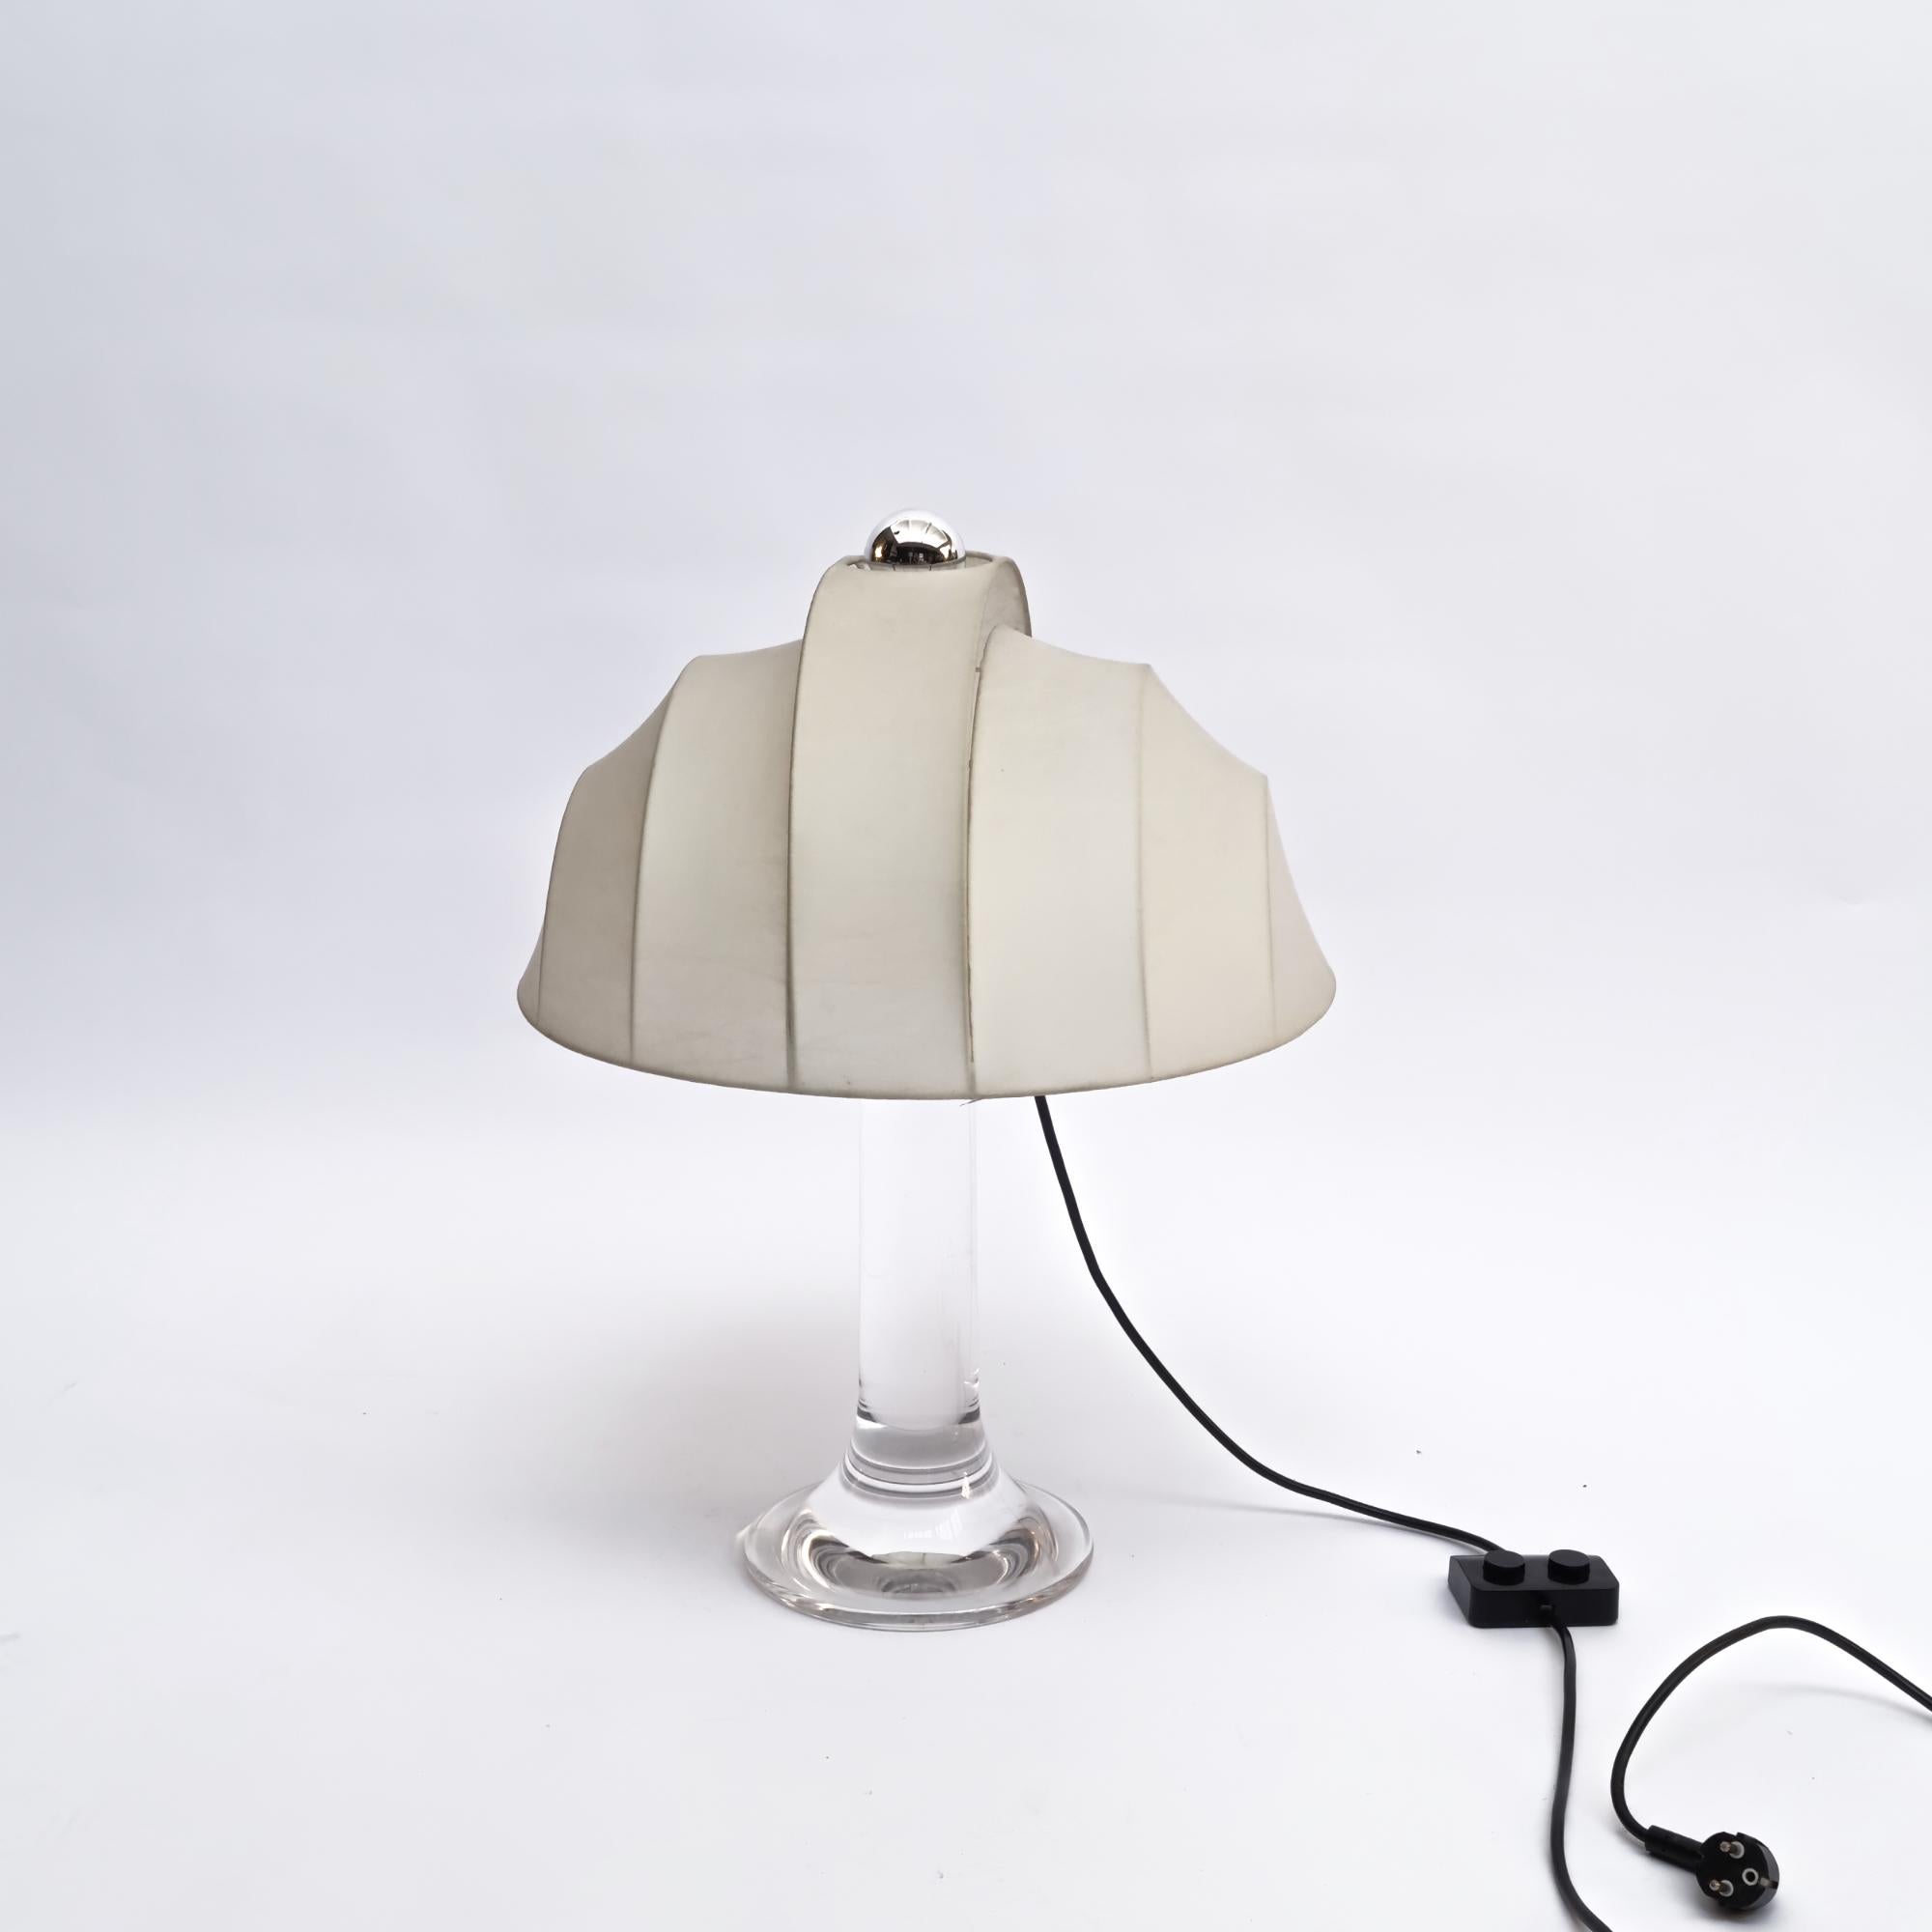 Original and rare table lamp by Luigi Massoni for Guzzini Harveiluce, 1970s.
Materials: Conical clear acrylic solid tube or rod base. Comes with original lampshade!

3x E14 + 1x E27 European Plug (up to 250V).

Base: H60 x D22

Shade: H26 x